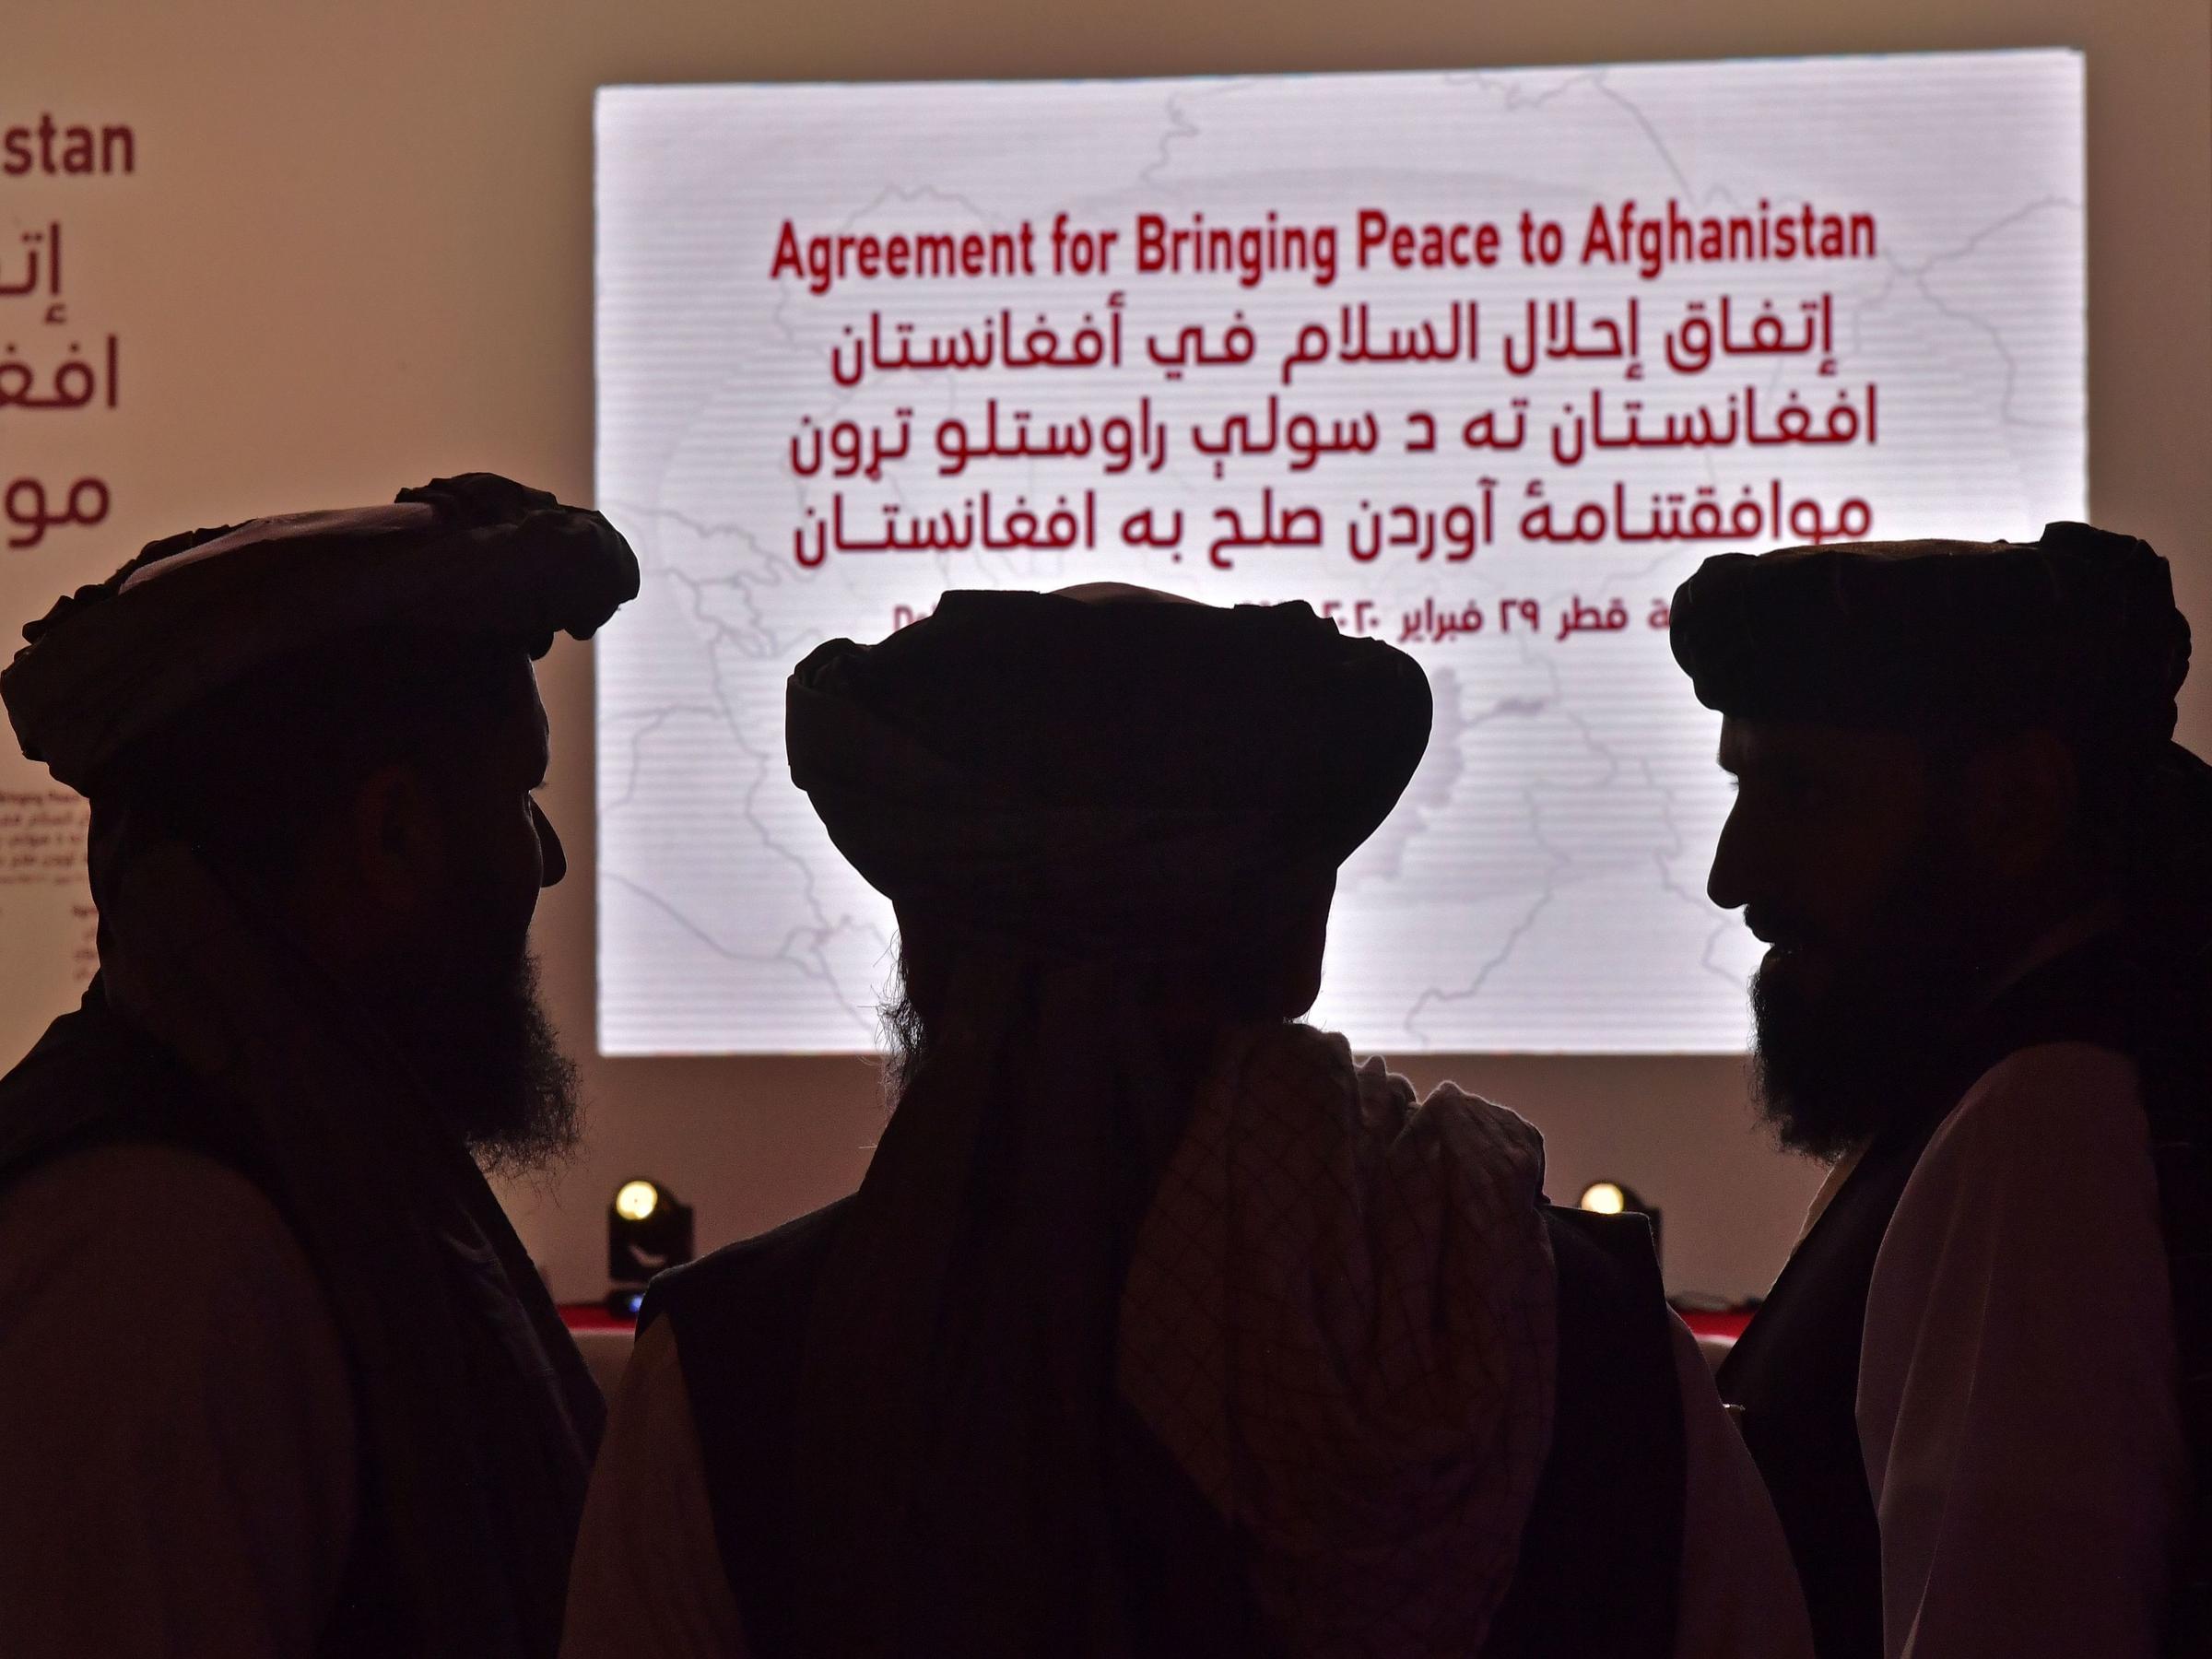 Members of the Taliban delegation gather ahead of the signing ceremony with the United States in the Qatari capital of Doha